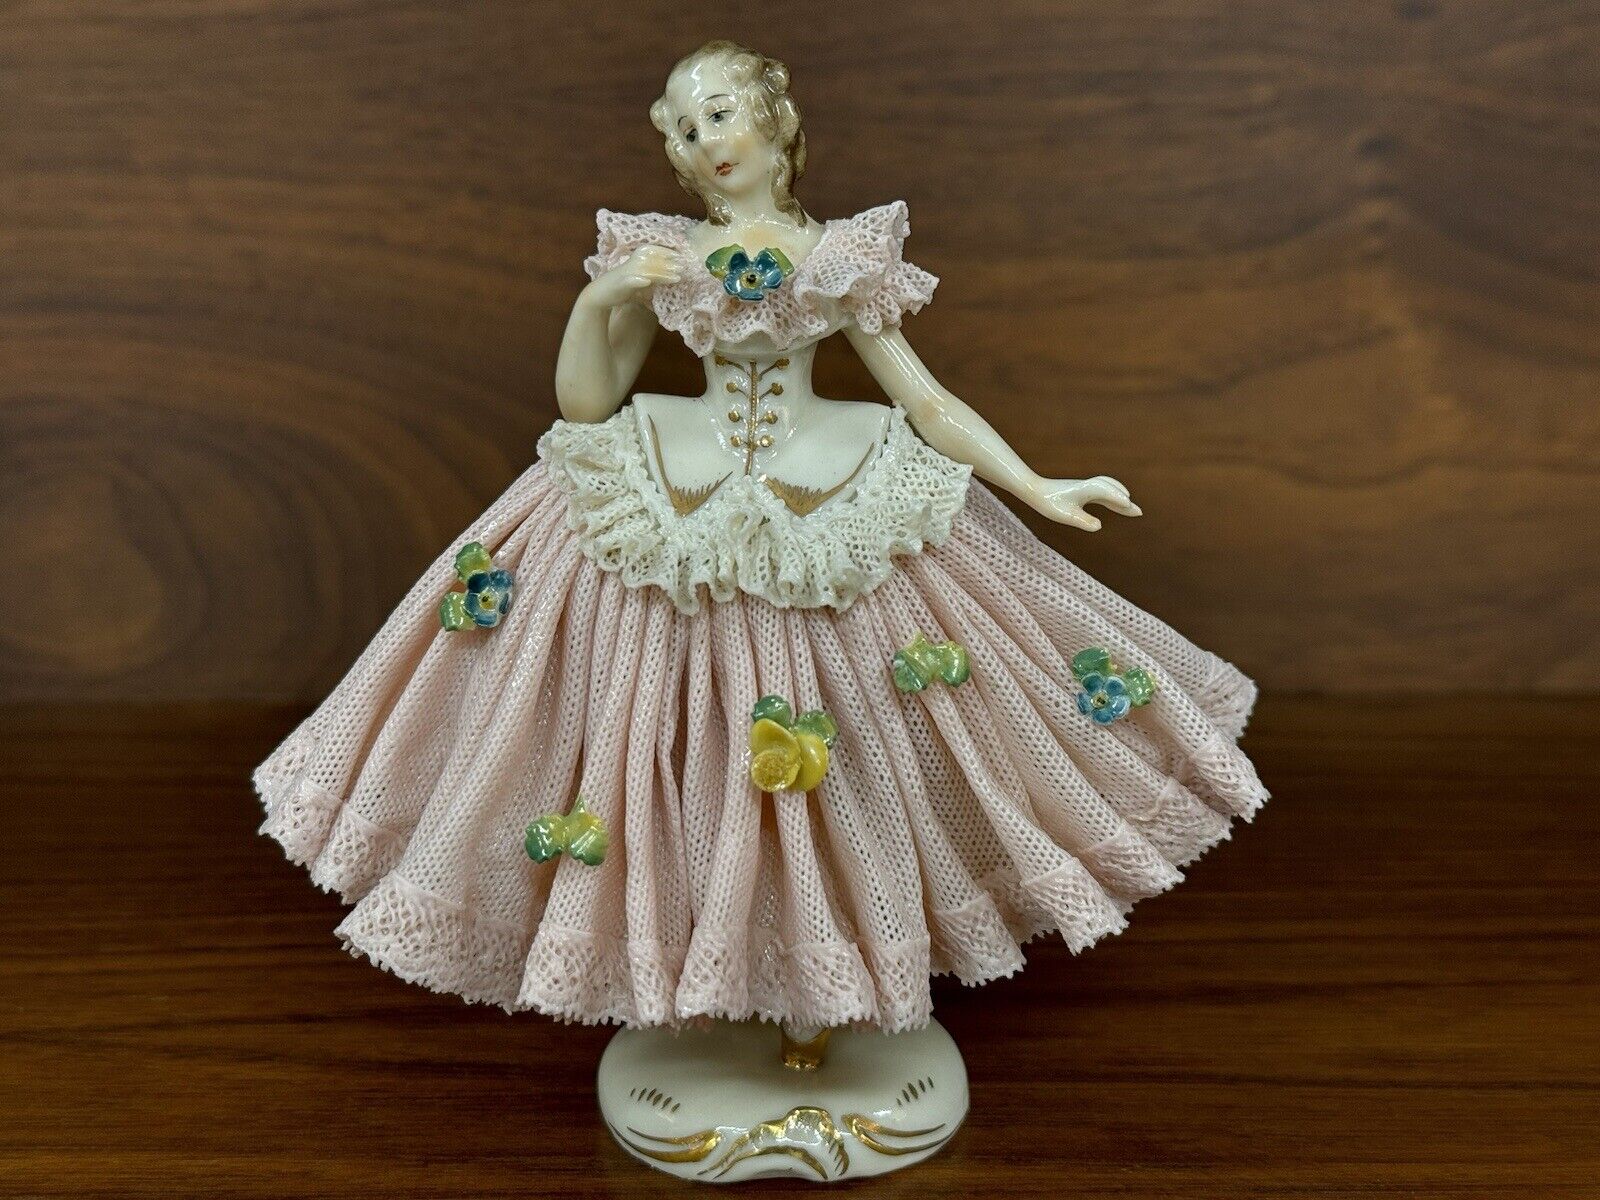 Vintage FURSTENBERG Germany Woman in Pink Dress Figurine, Dresden Style Lace